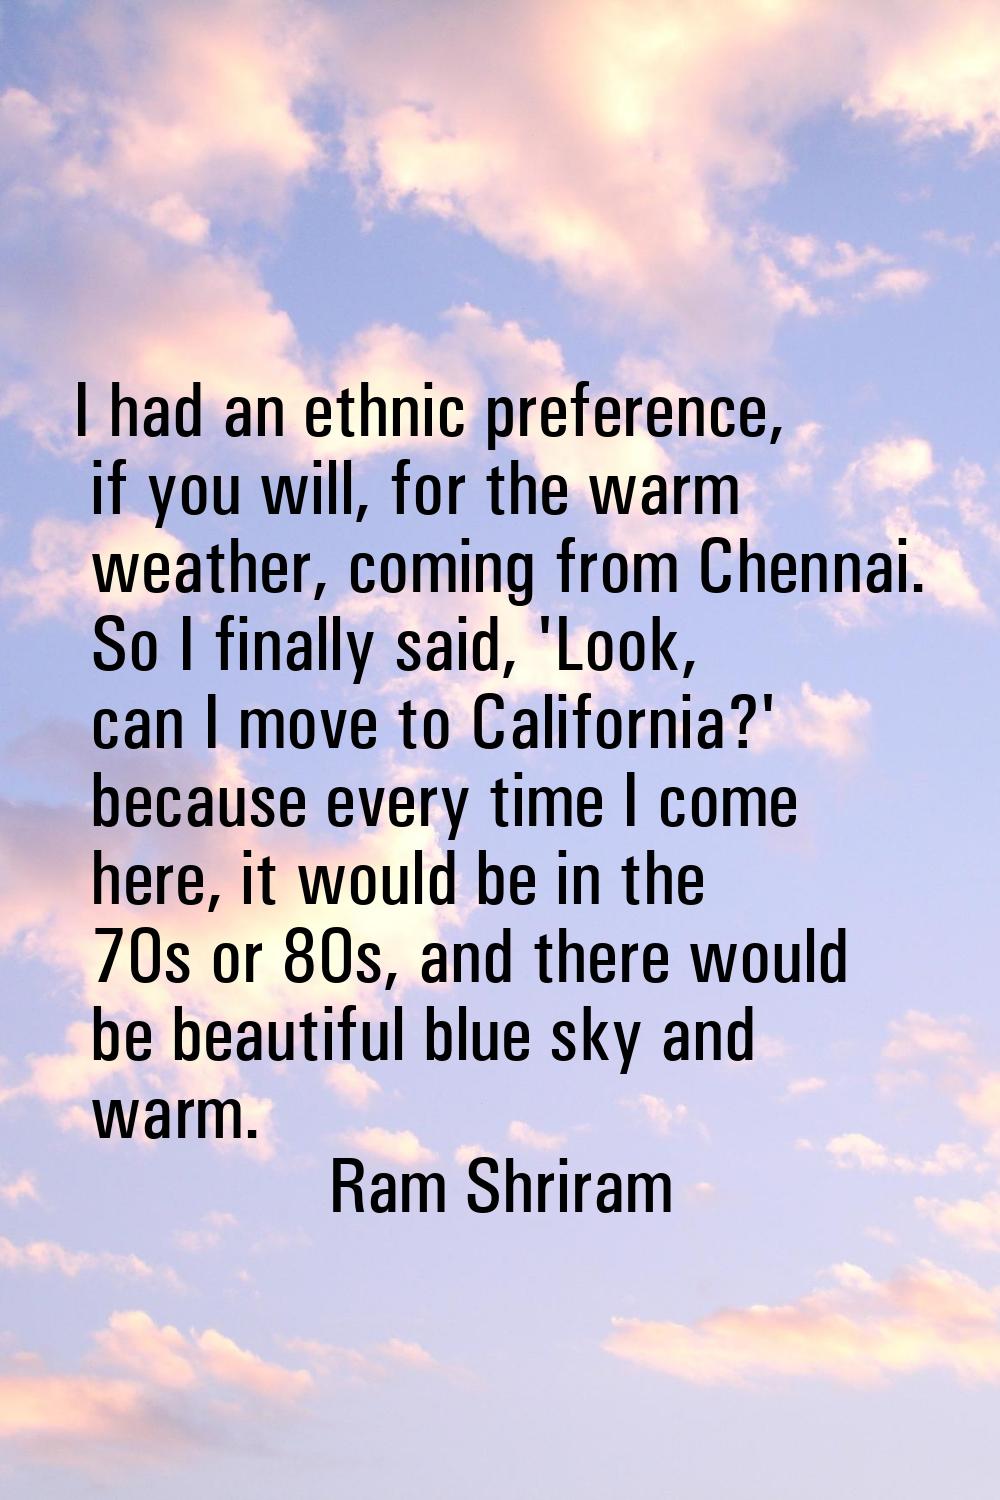 I had an ethnic preference, if you will, for the warm weather, coming from Chennai. So I finally sa